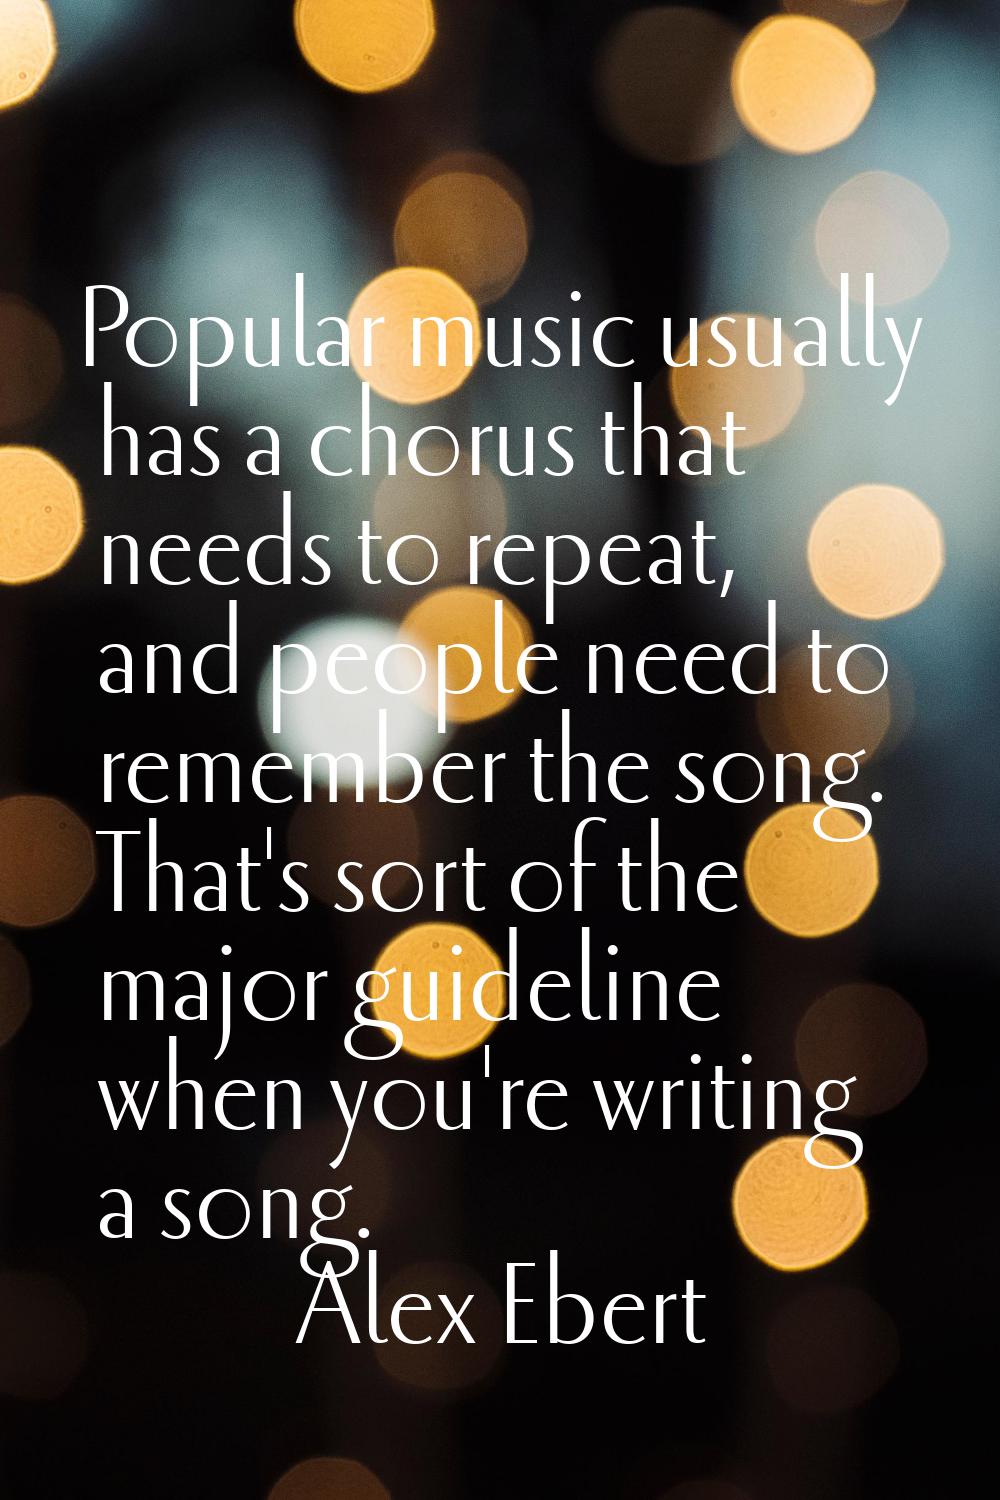 Popular music usually has a chorus that needs to repeat, and people need to remember the song. That